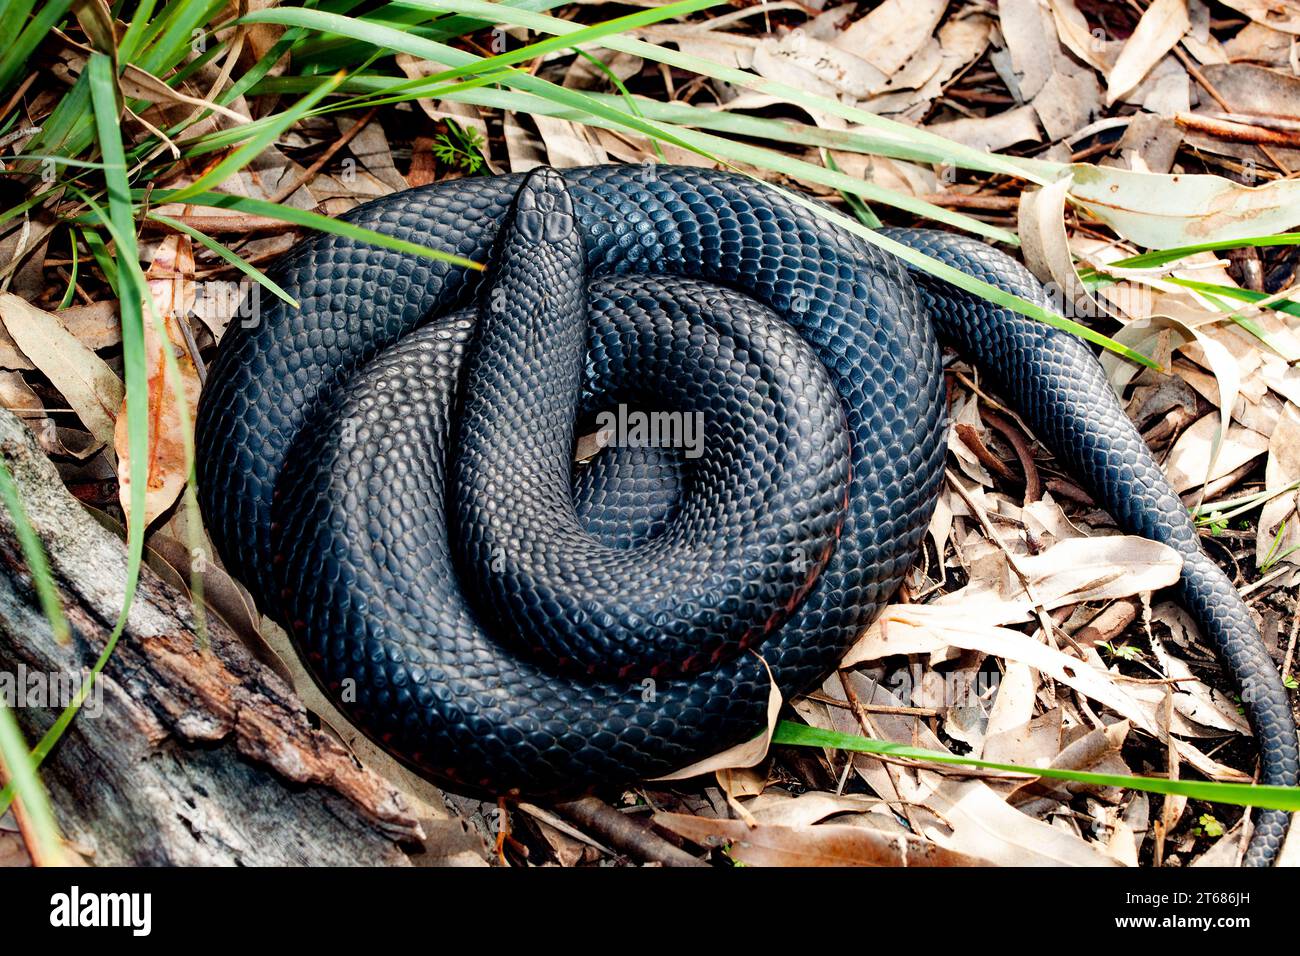 The red-bellied black snake (Pseudechis porphyriacus) is a species of venomous snake in the family Elapidae, indigenous to Australia. Stock Photo